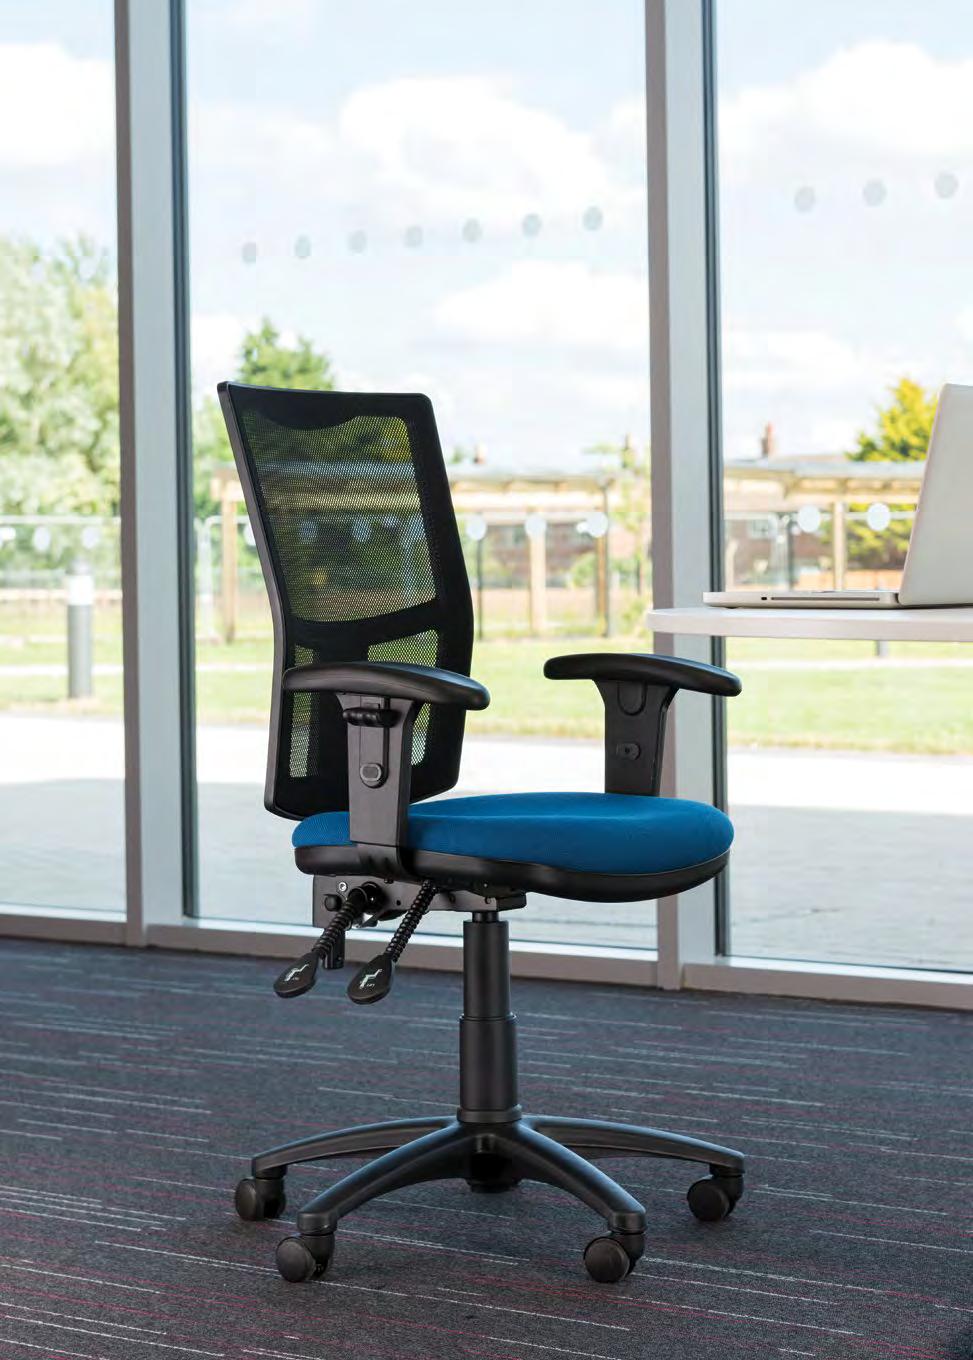 181 Task & Visitor Seating Goal GL1 GL2 GL3 GL5 GL6 GL7 TECH Goal Operator Chair A proven, affordable, entry level option with enduring